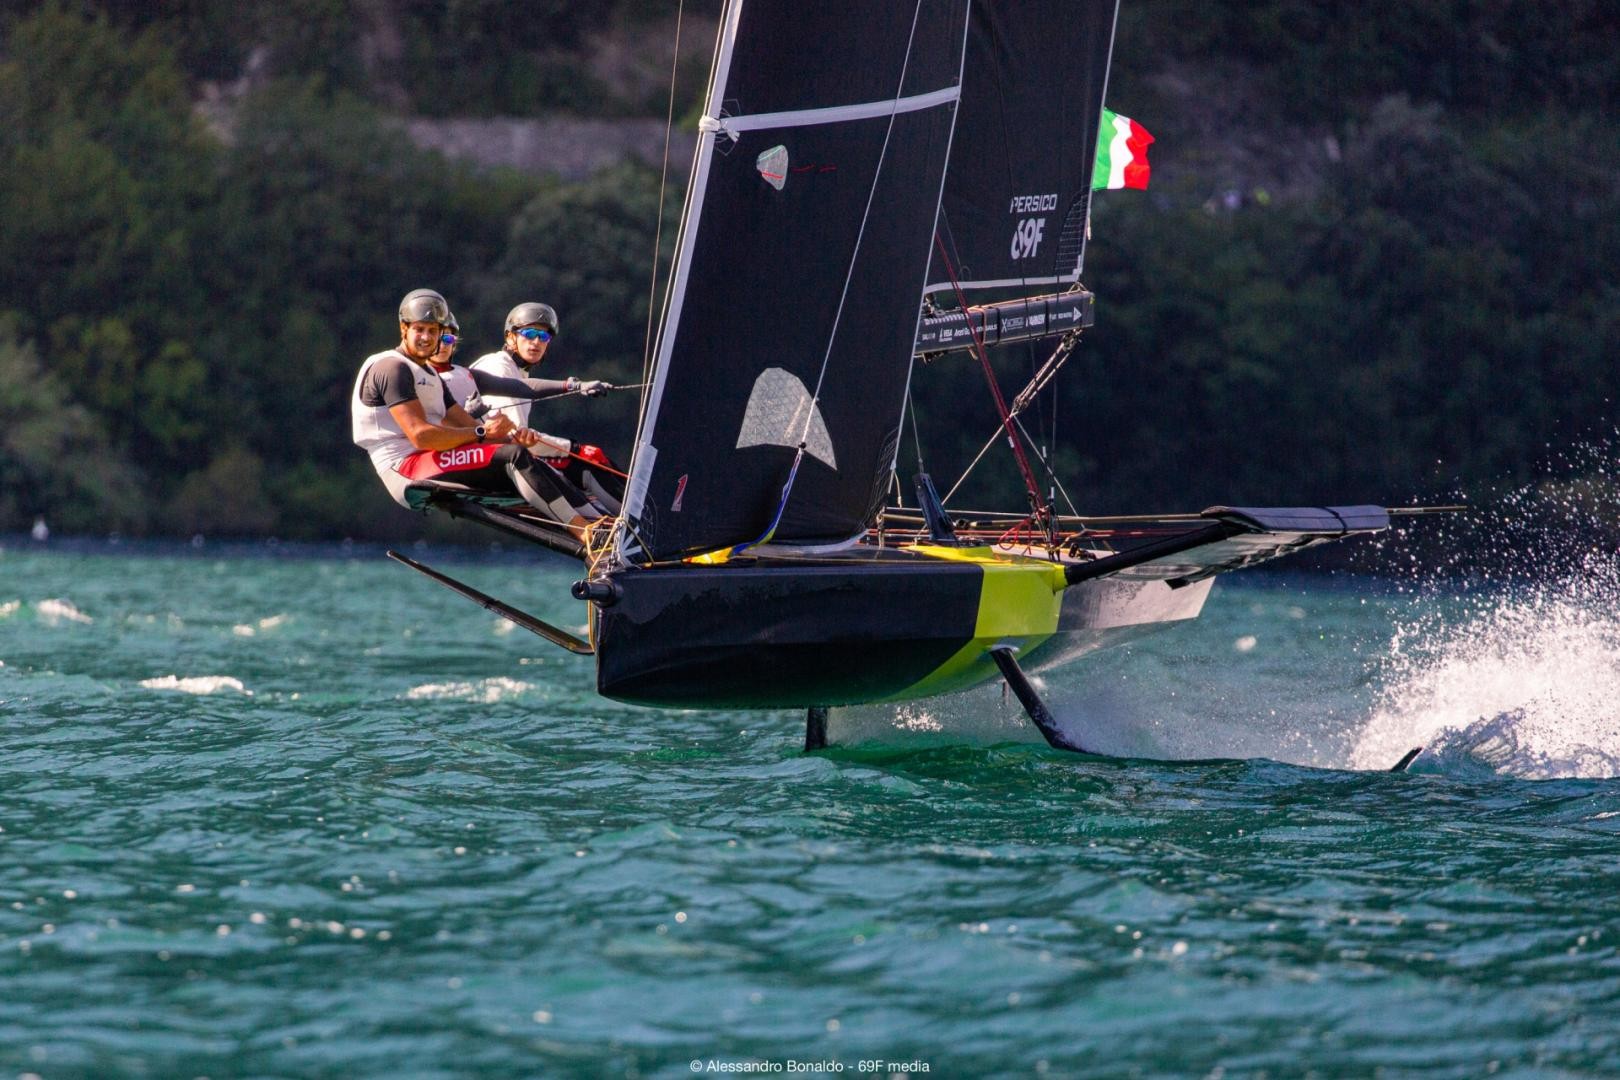 Youth Foiling Gold Cup: Young Azzurra concludes the qualifying rounds in third place